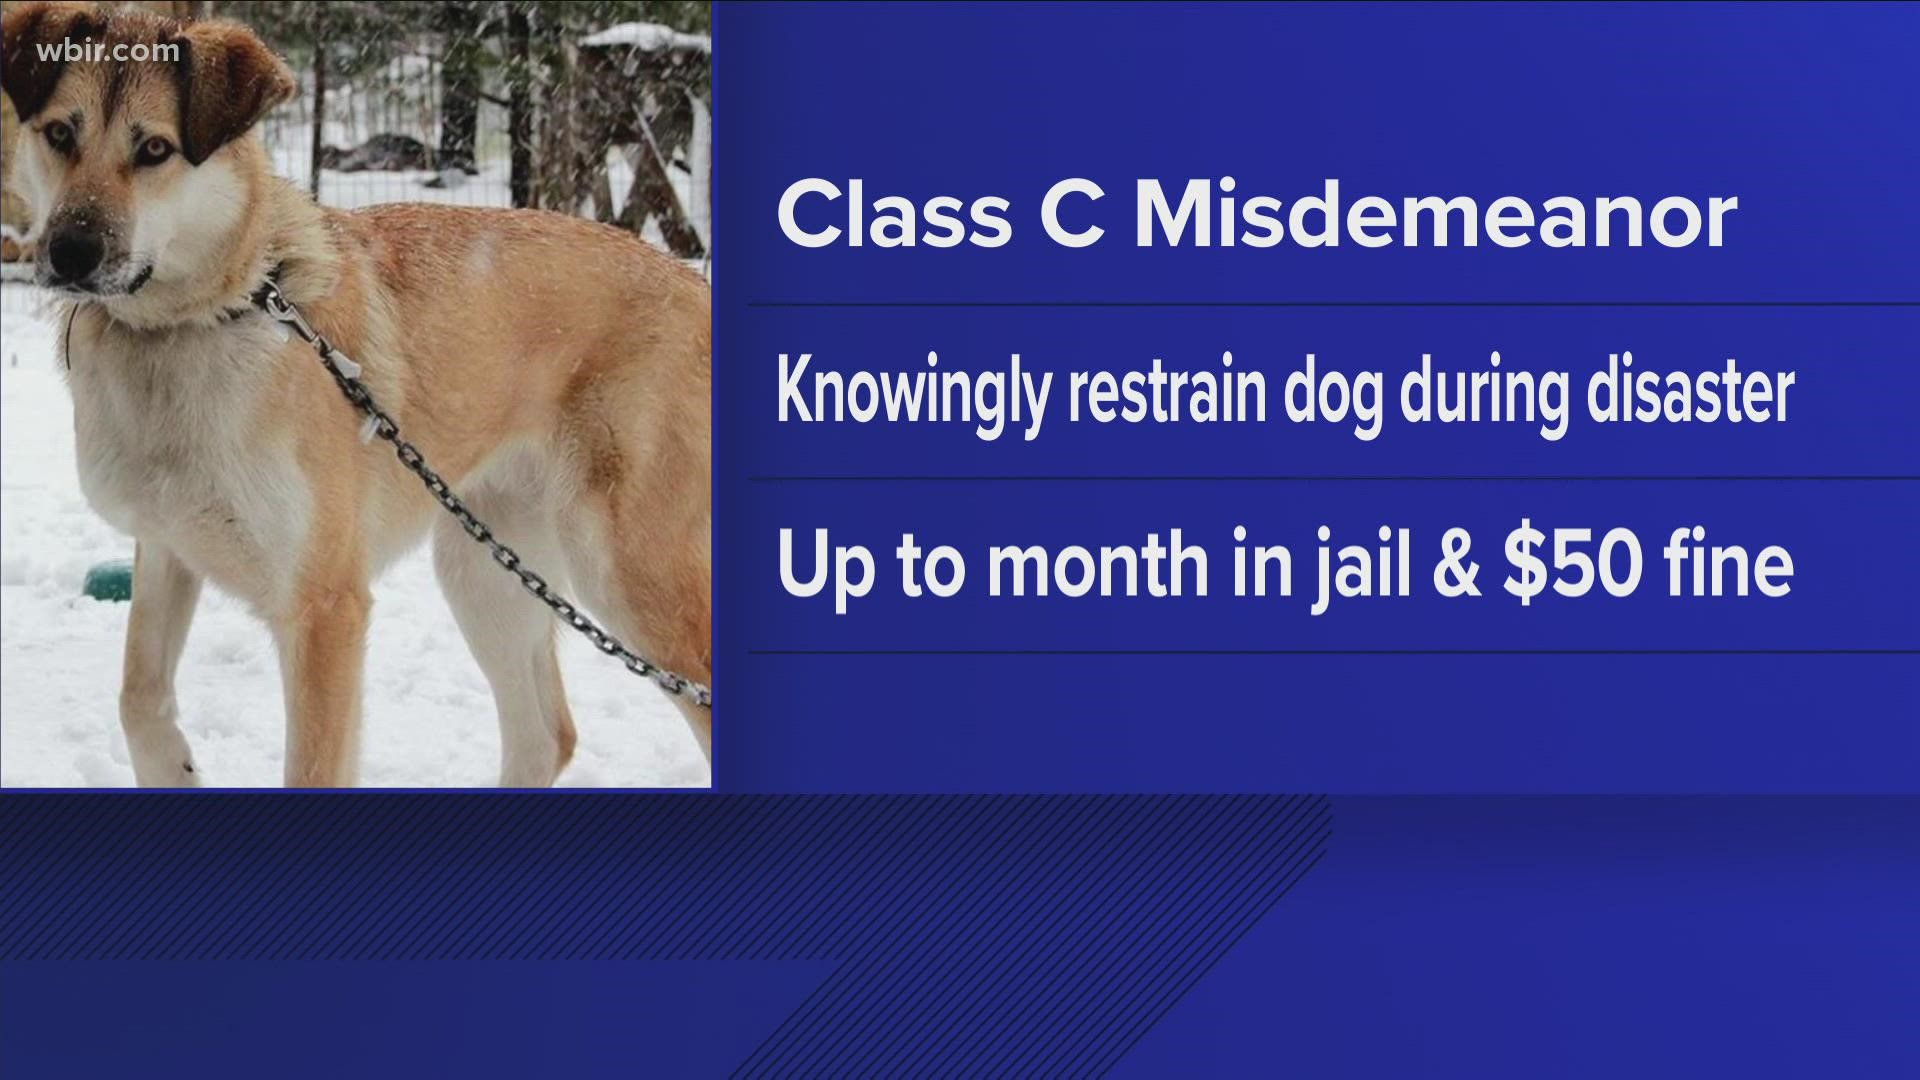 The bill would make it a crime for a dog to be tied up outside during severe weather, punishable by up to a month in jail.